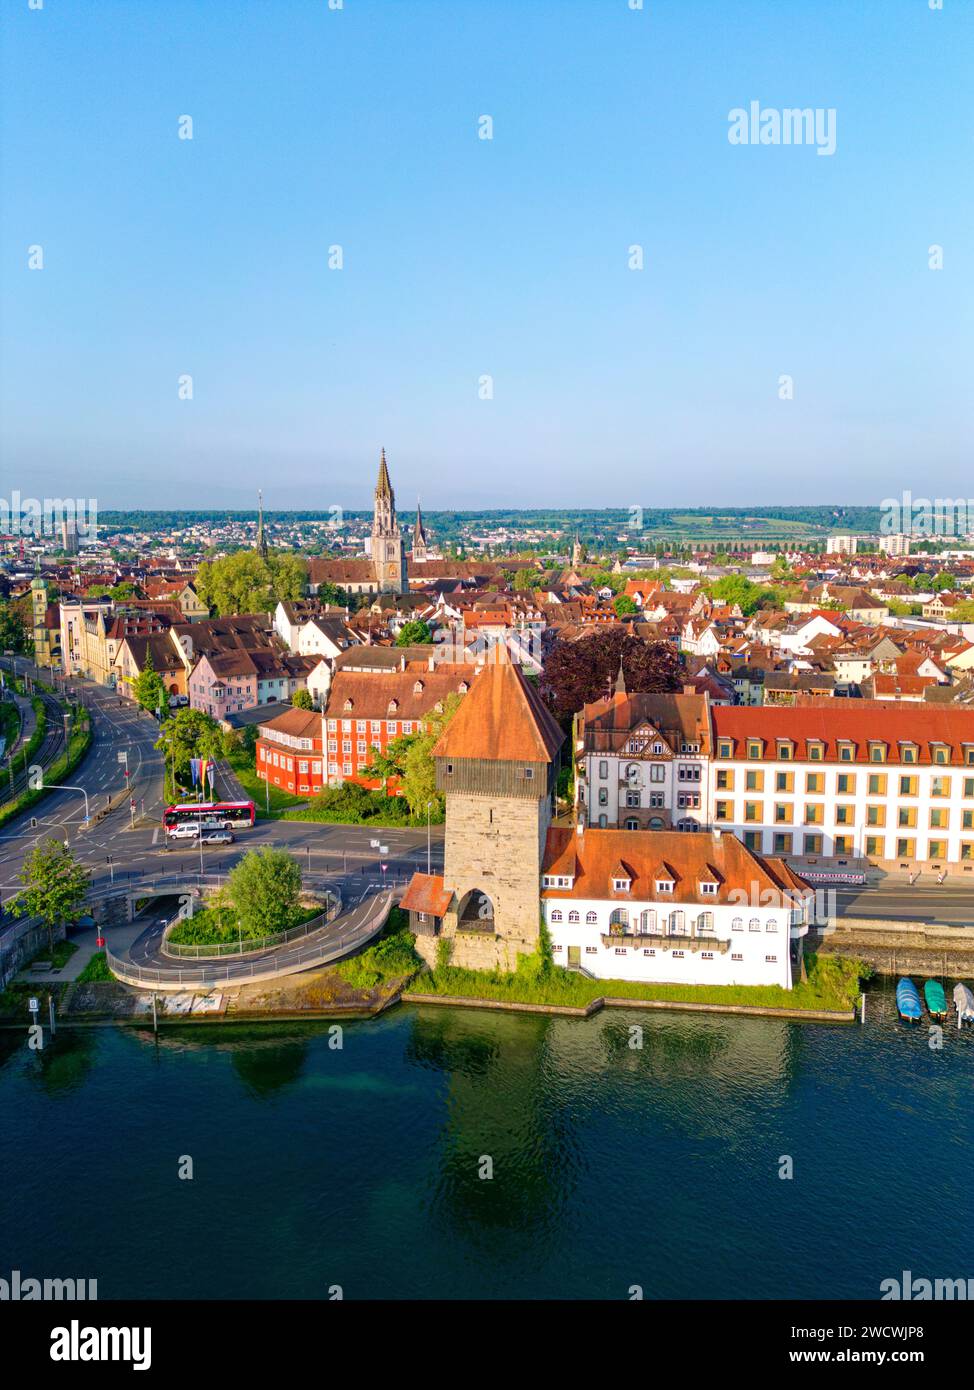 Germany, Bade Wurttemberg, Lake Constance (Bodensee), Konstanz, Rheintorturm (Rhine tower) and Cathedral (Münster) Stock Photo